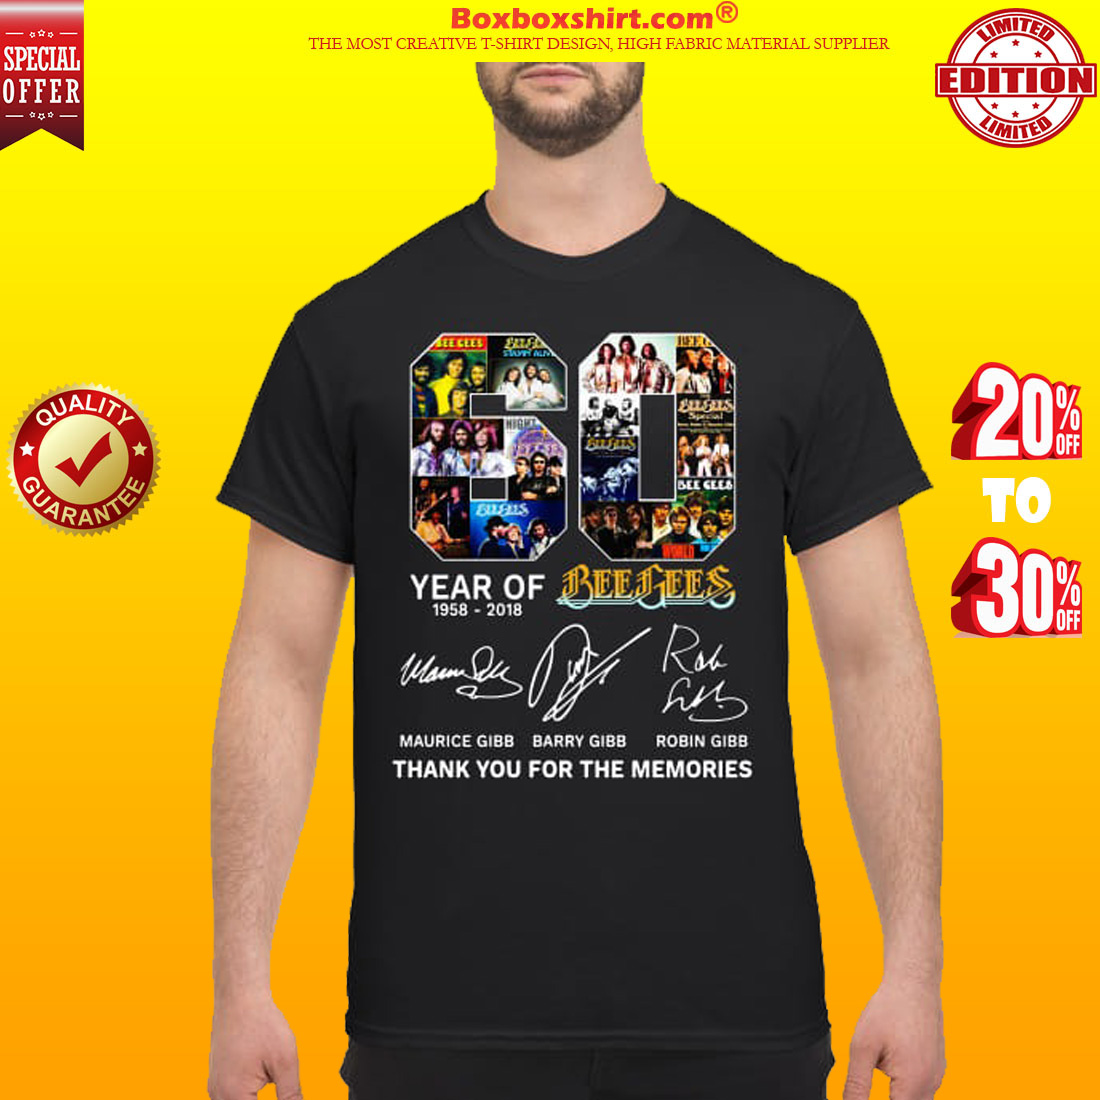 60 years of Bee Gees Thank you for the memories classic shirt